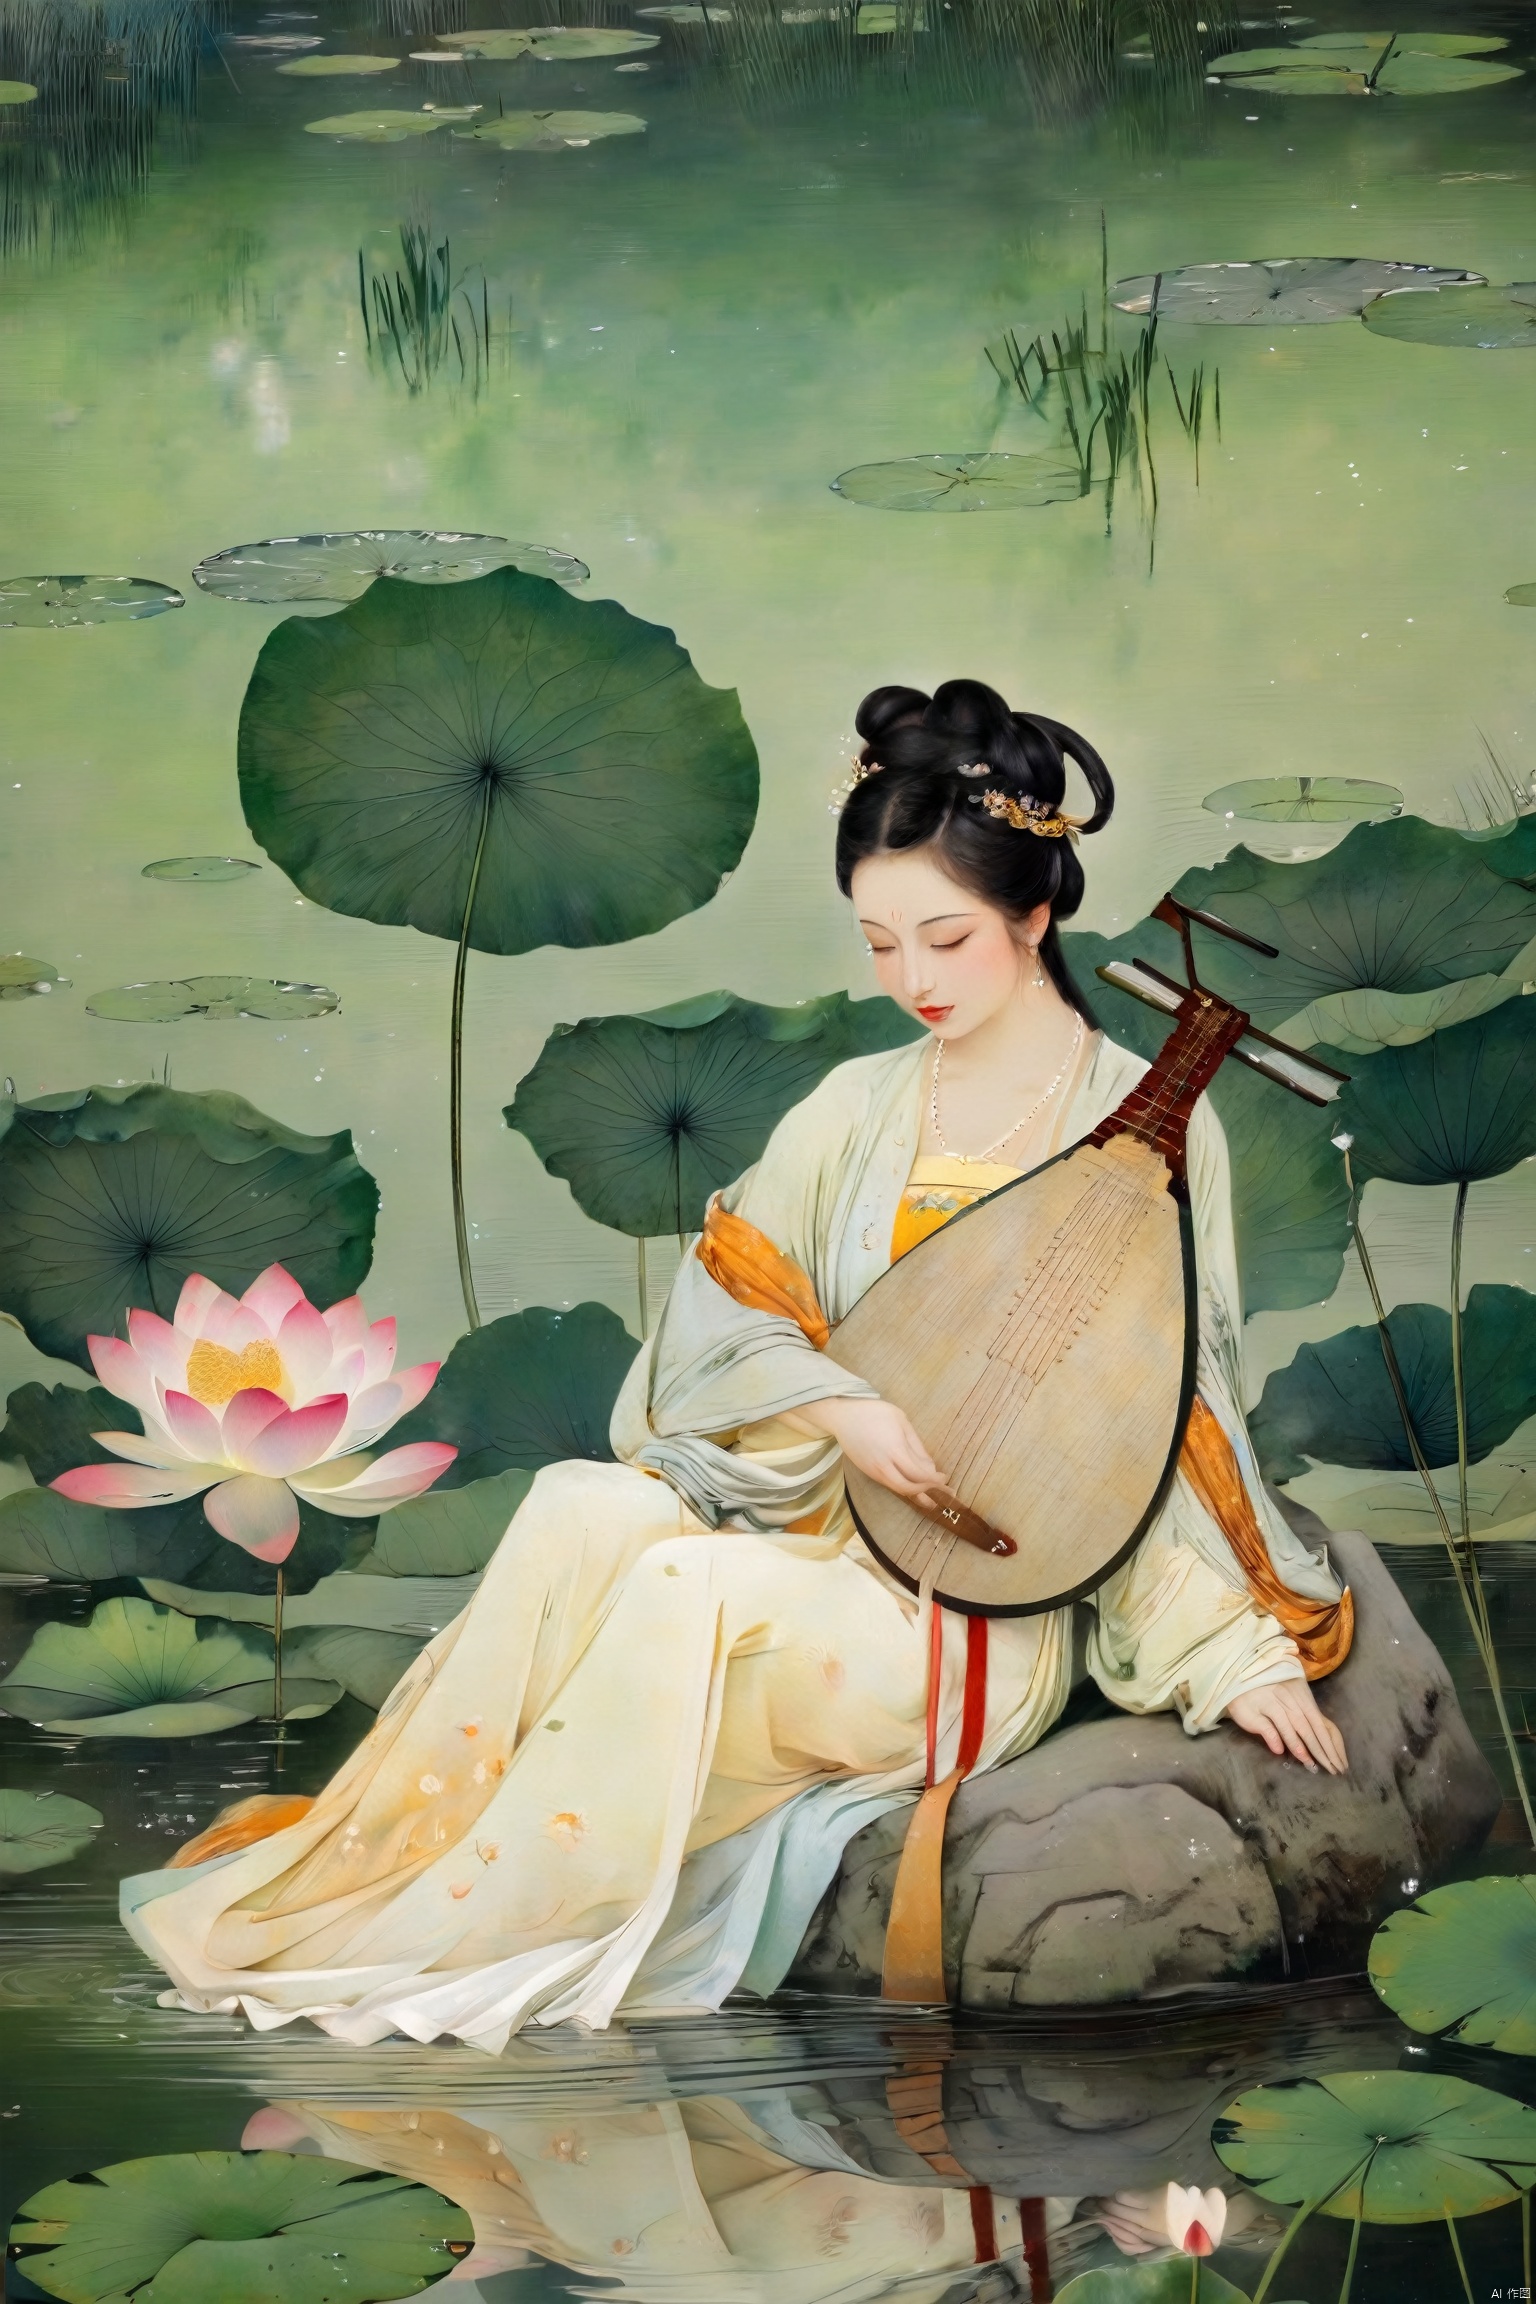 The woman, dressed in traditional Hanfu, sits on a green stone by the pond, gently strumming her biwa lute. The blooming lotus flowers and darting dragonflies complement the melodious notes of the pipa, creating a harmonious scene of movement and stillness.